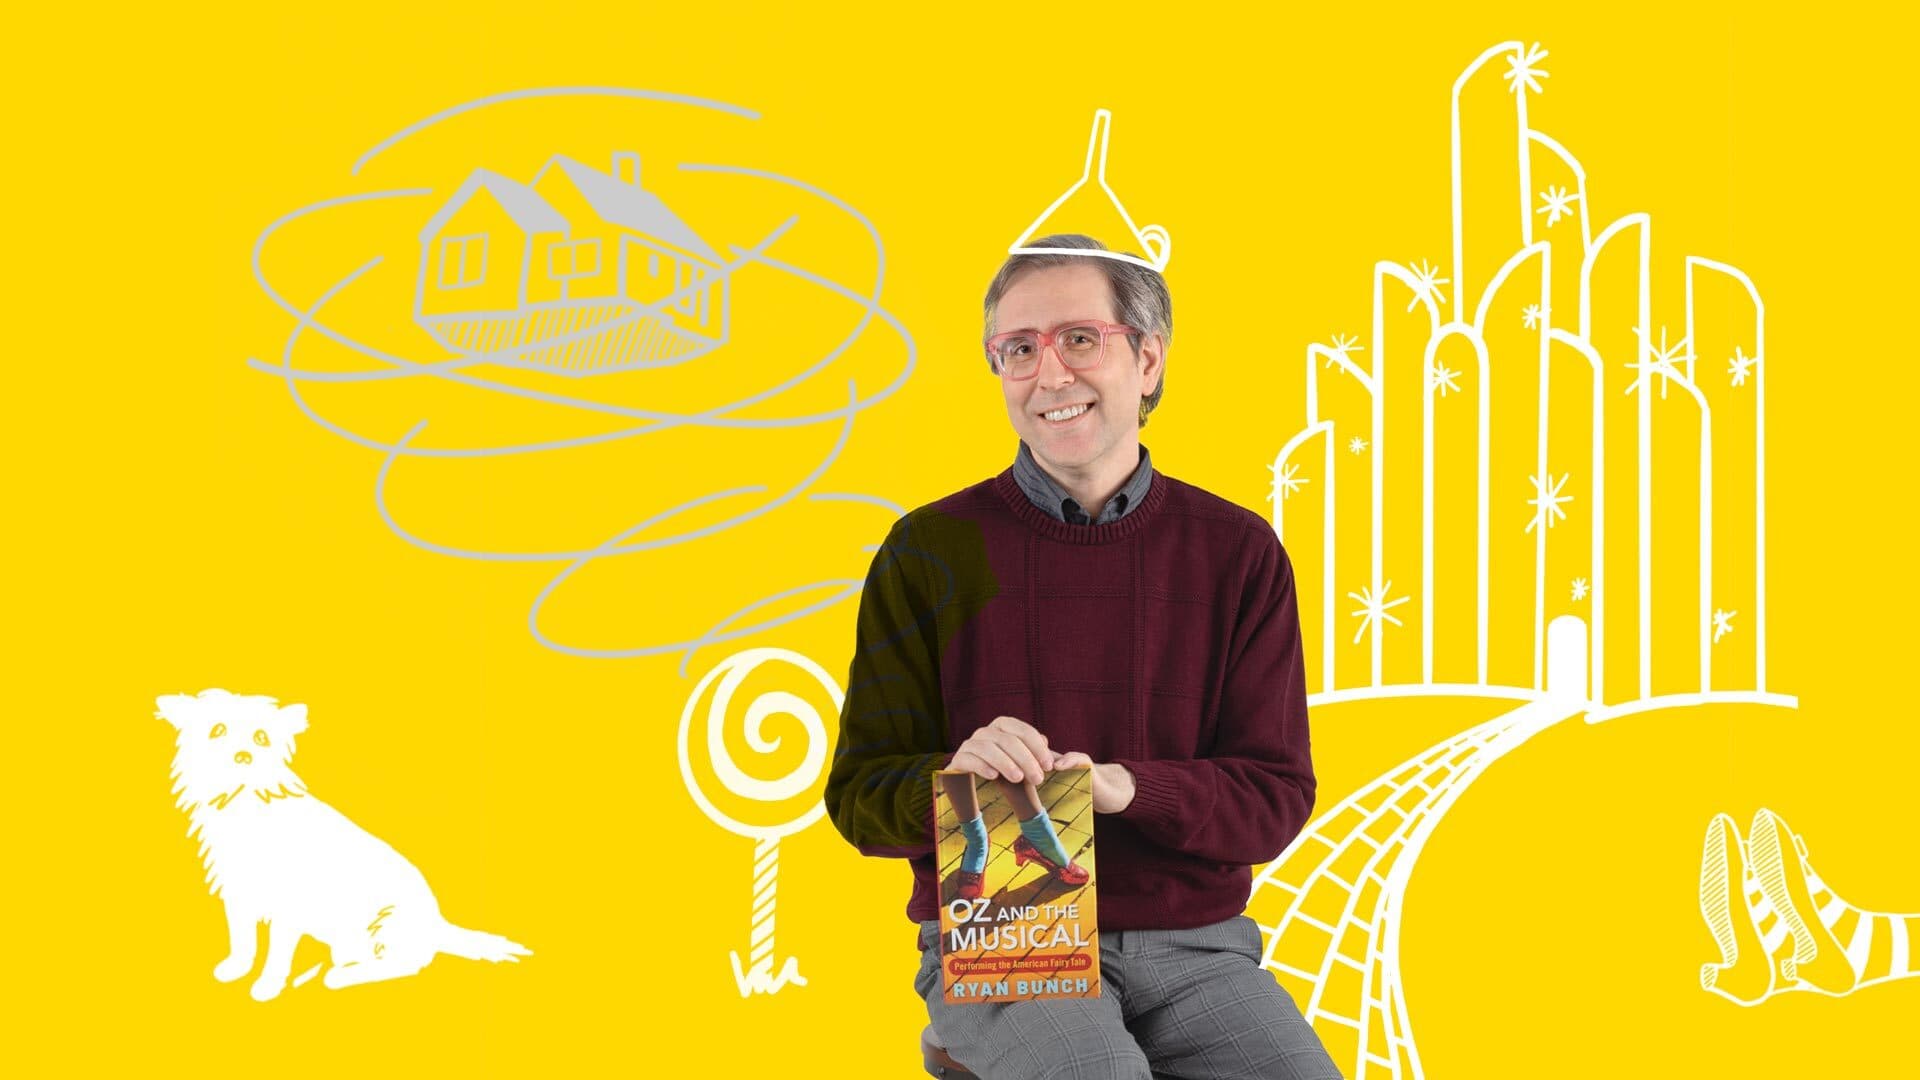 Ryan Bunch poses with "Oz and the Musical" book on yellow background with Wizard of Oz doodles